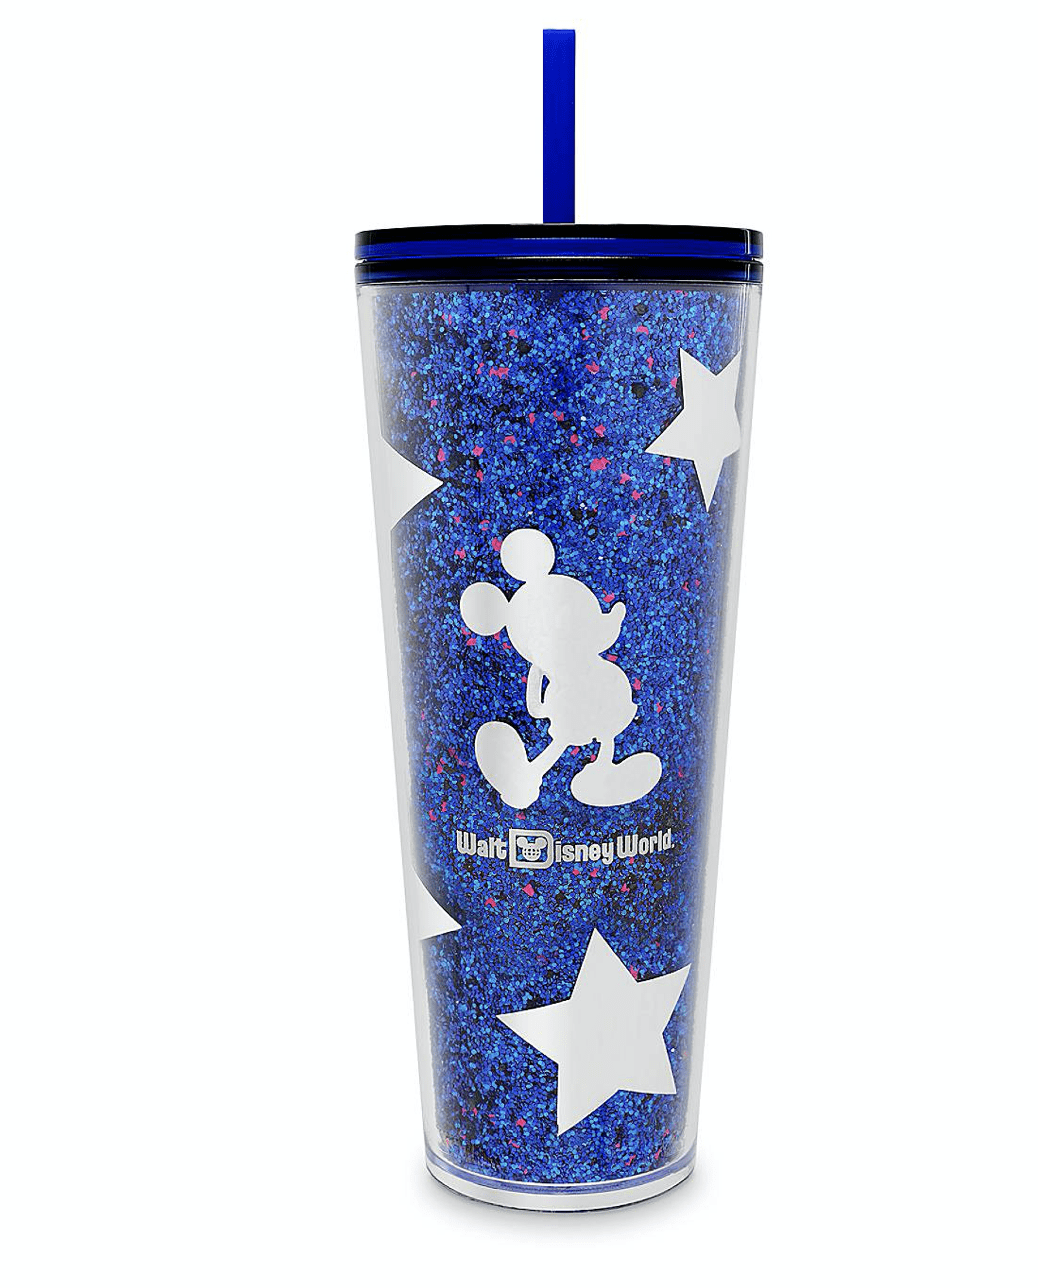 Mickey Mouse Starbucks Cup Disney Cup Mickey Starbucks Cup Gift for Disney Lovers Disney Starbucks Cup